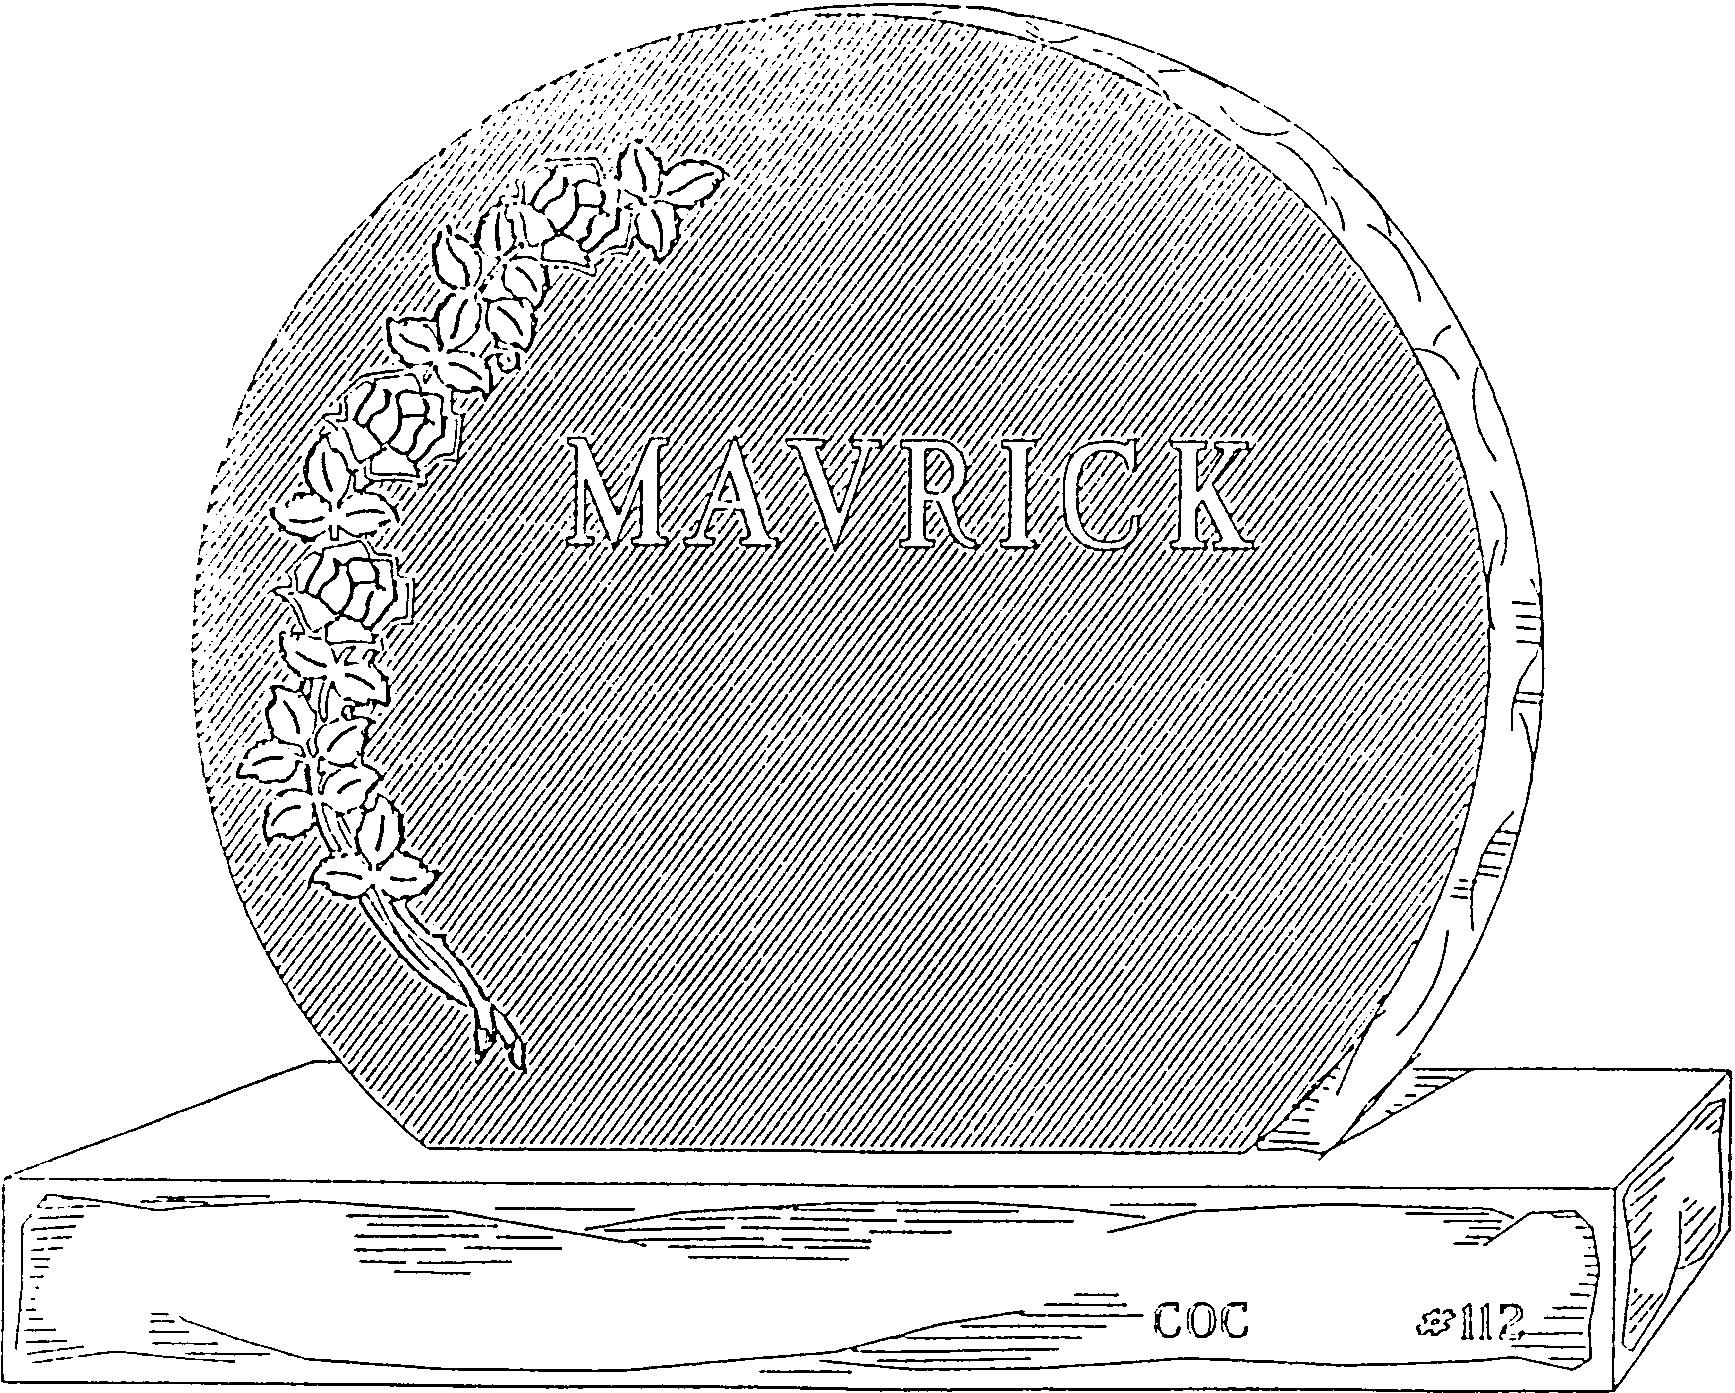 a black and white drawing of a circular object with the name maverick written on it .